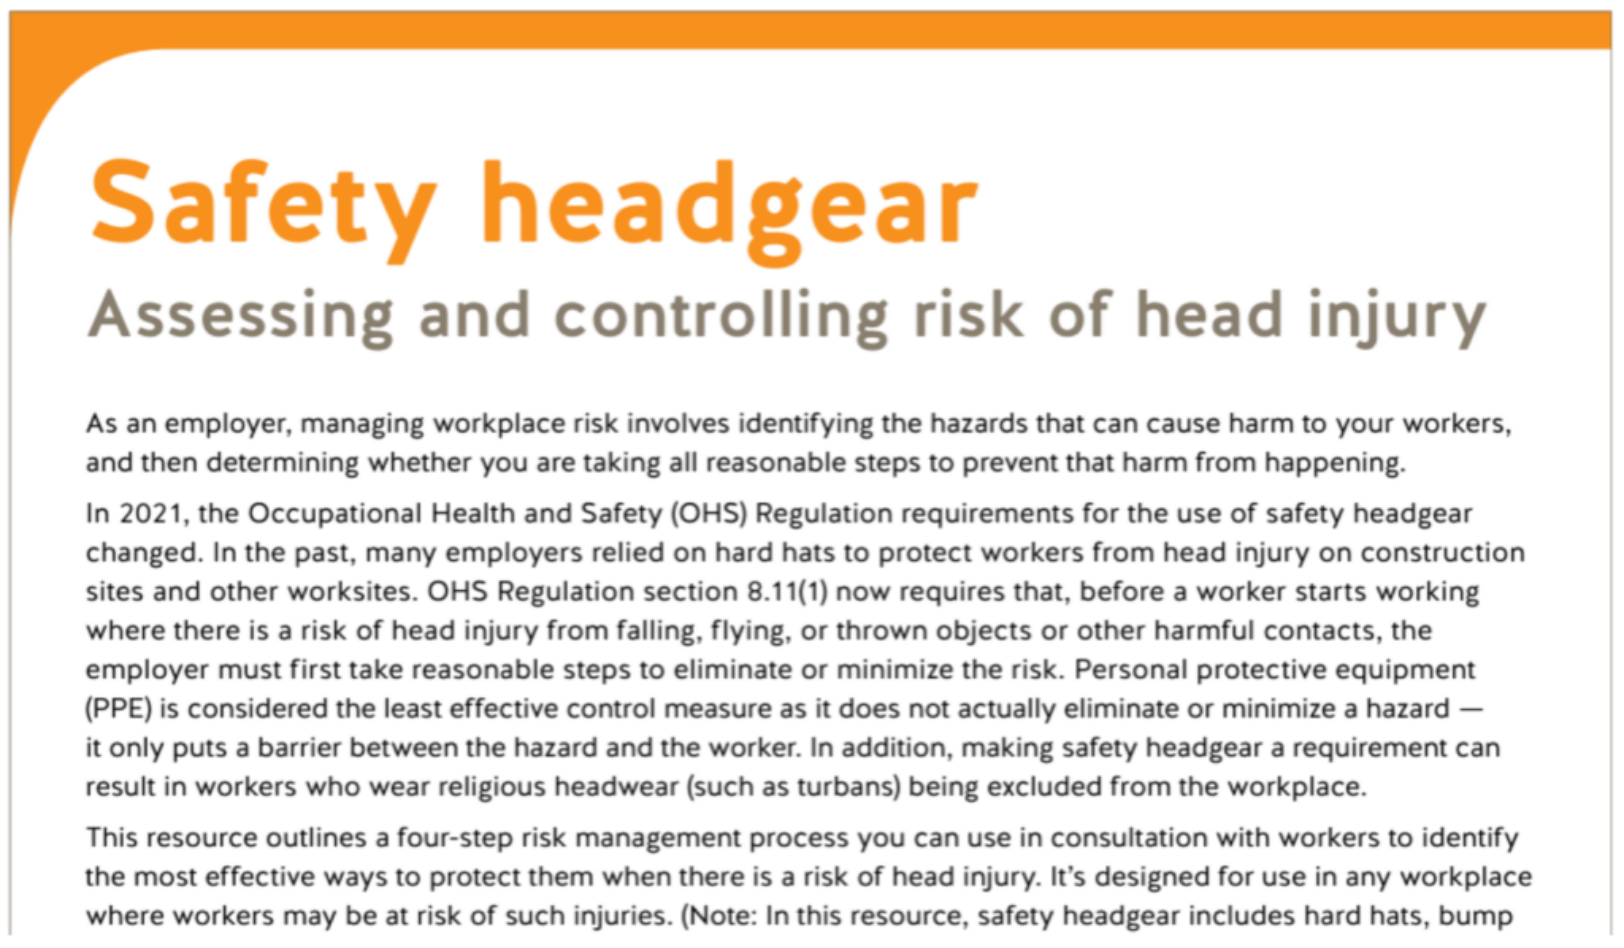 Safety Headgear: Assessing and Controlling Risk of Head Injury